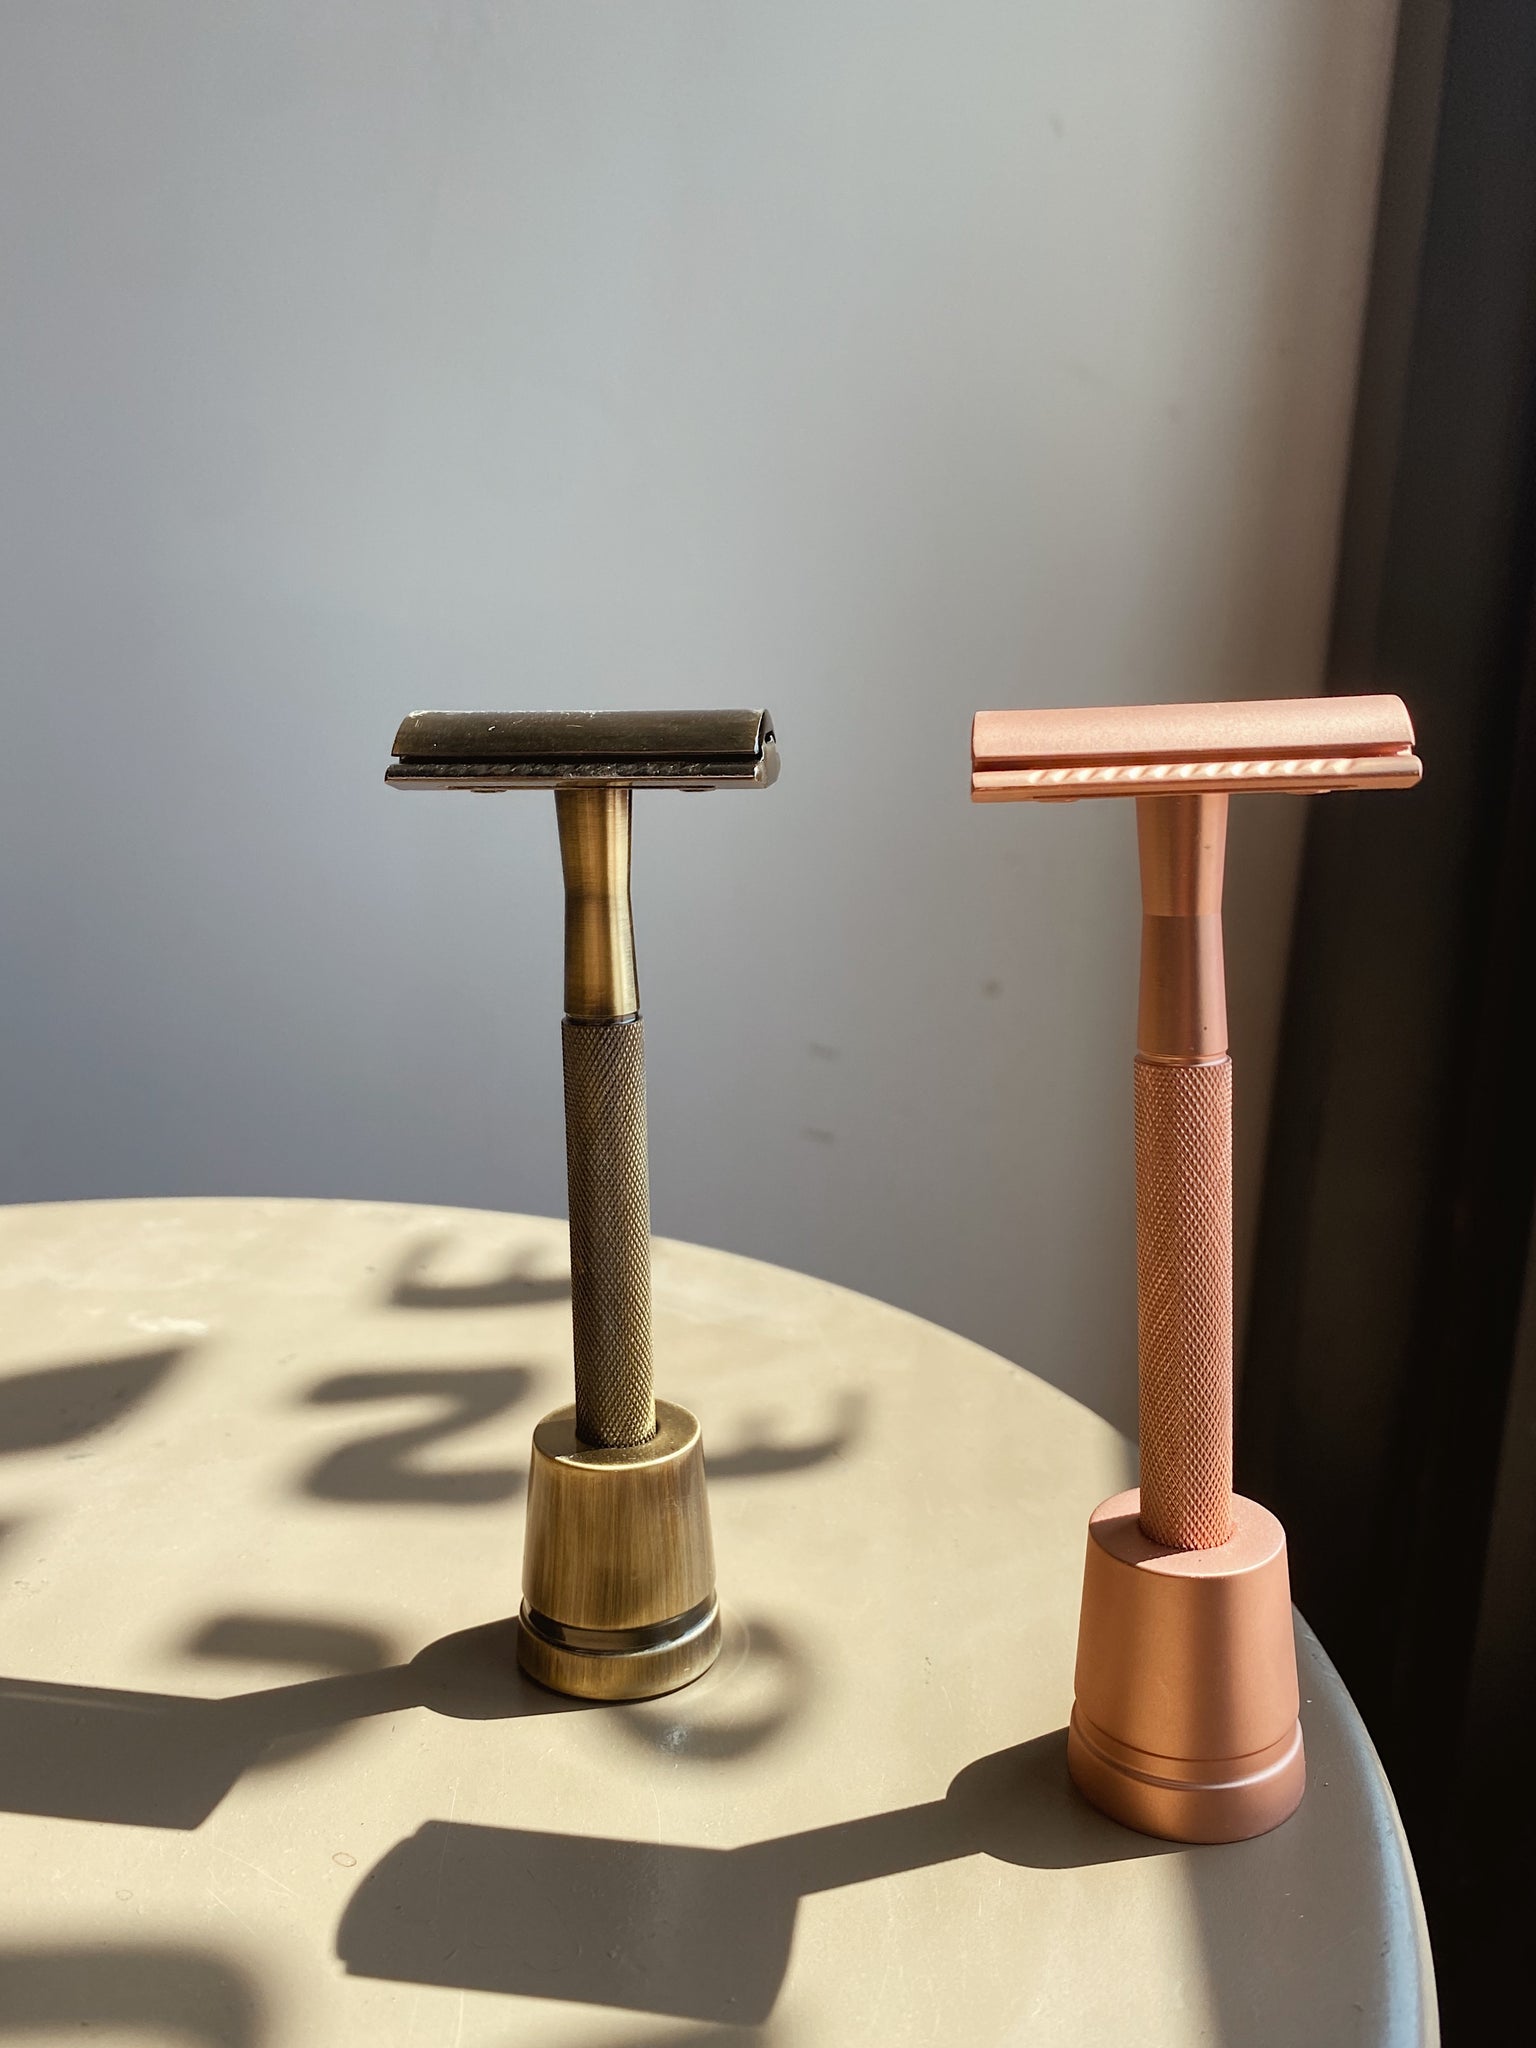 Reusable Stainless Steel Razor with Stand